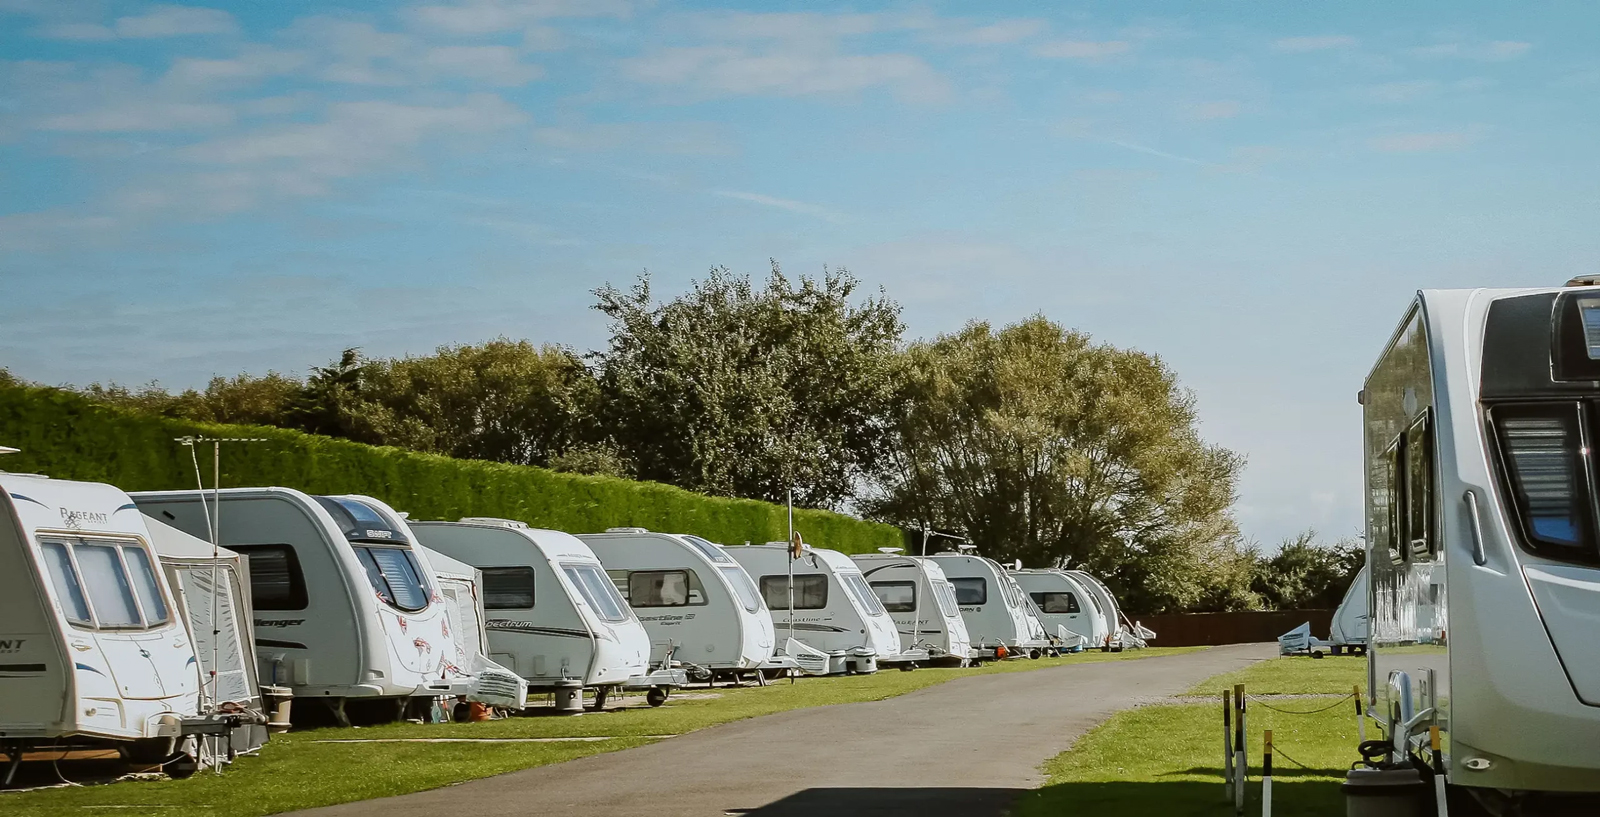 Line of caravans and motorhomes at Country View Holiday Park in Weston Super Mare